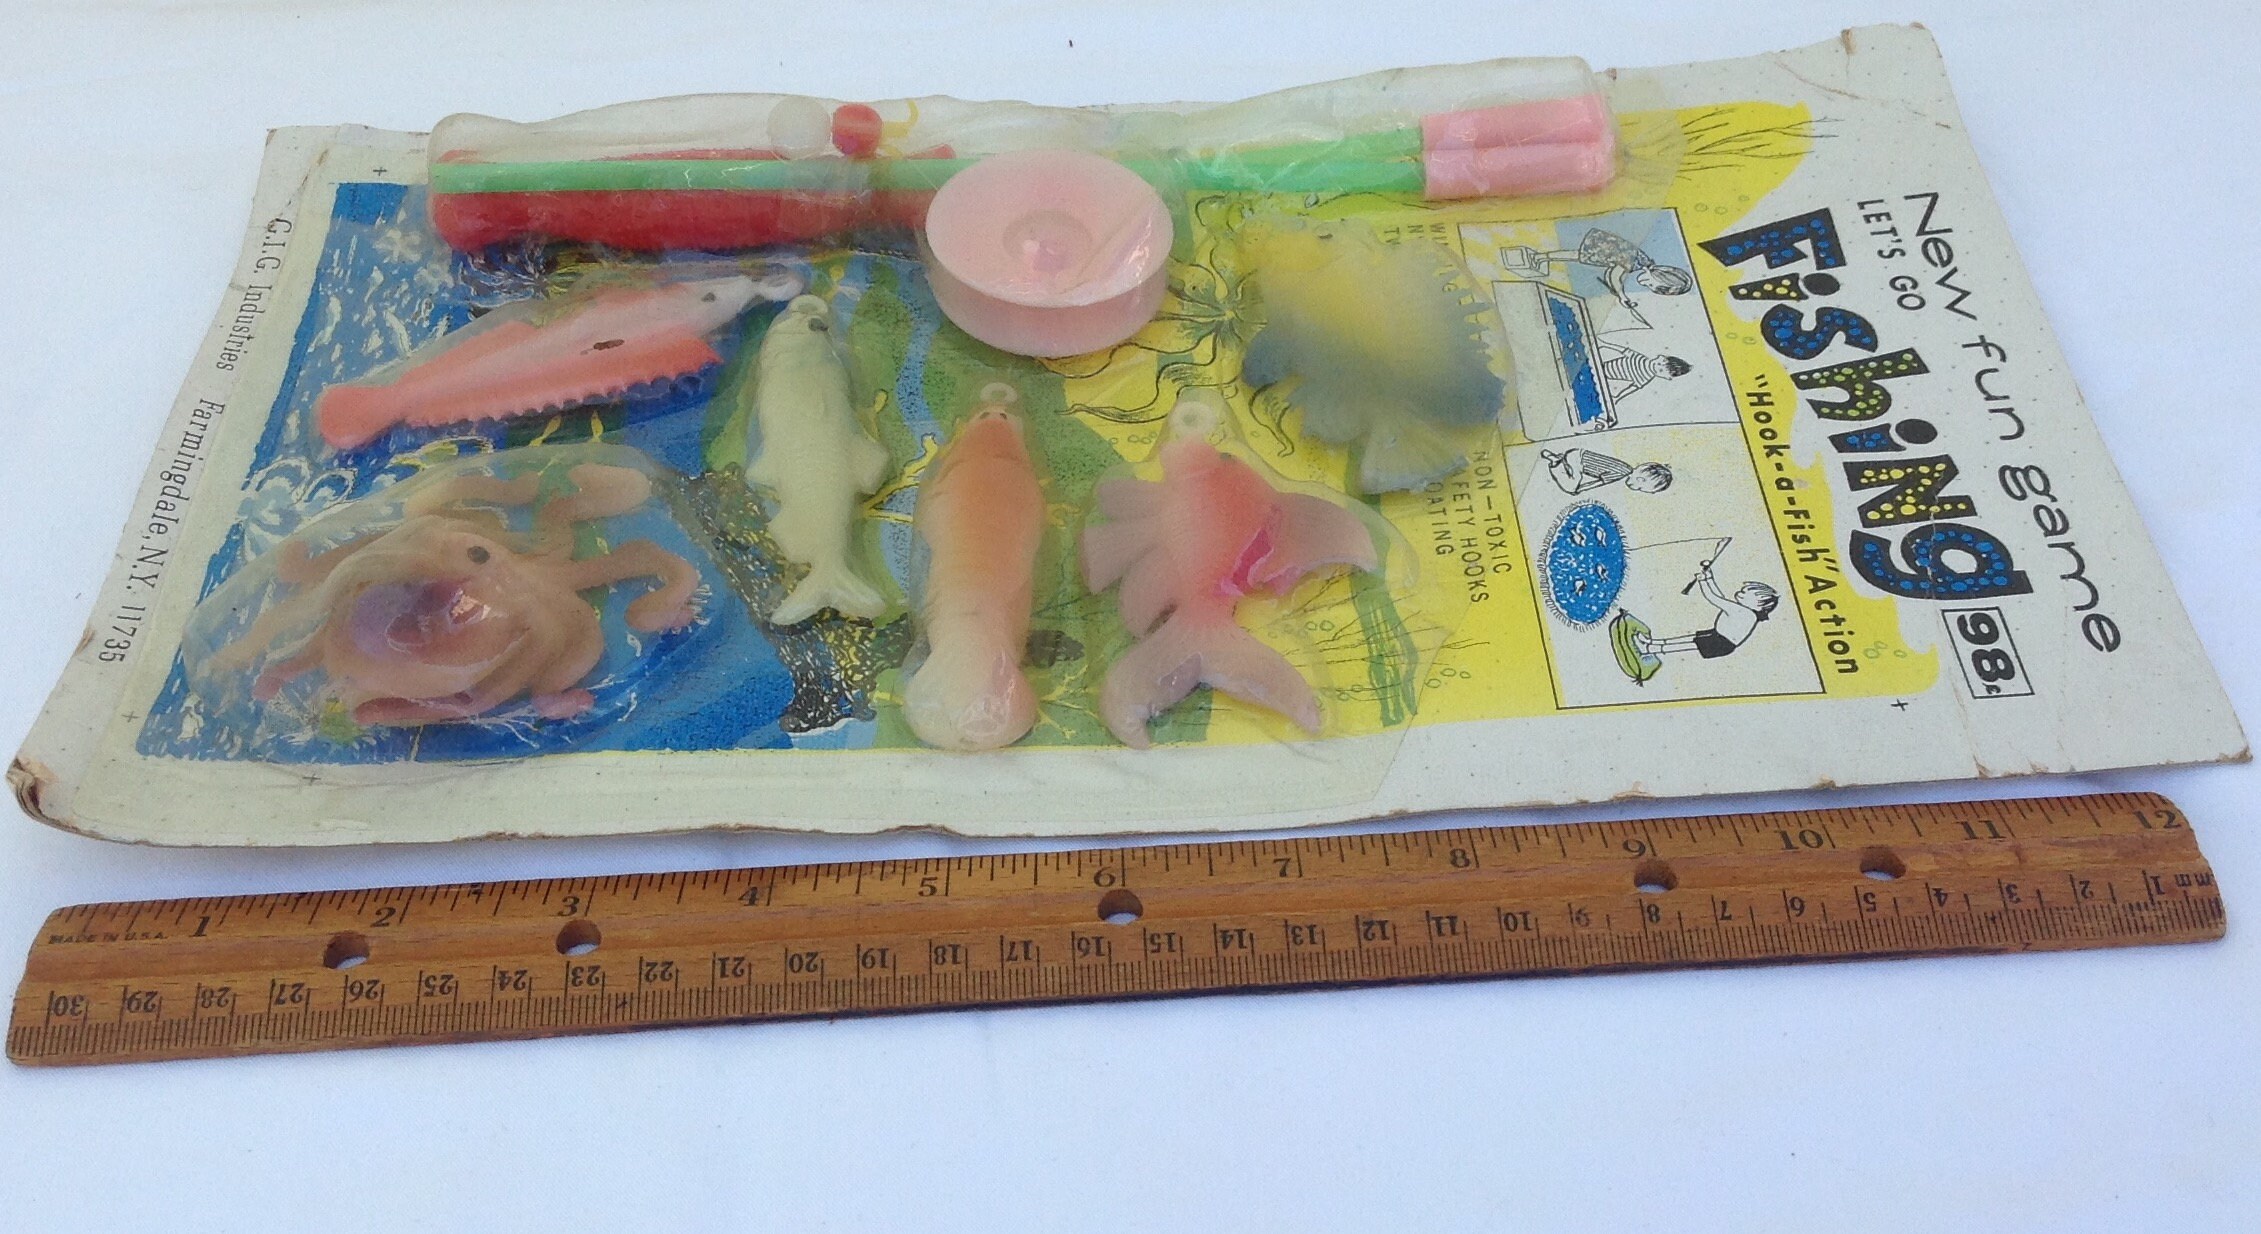 Vintage Fishing Toy 1960's Plastic Play Set Dime Store New Fun Let's Go  Fishing USA Hook & Fish Action Reel Line Hook GIG Industries NIP New 